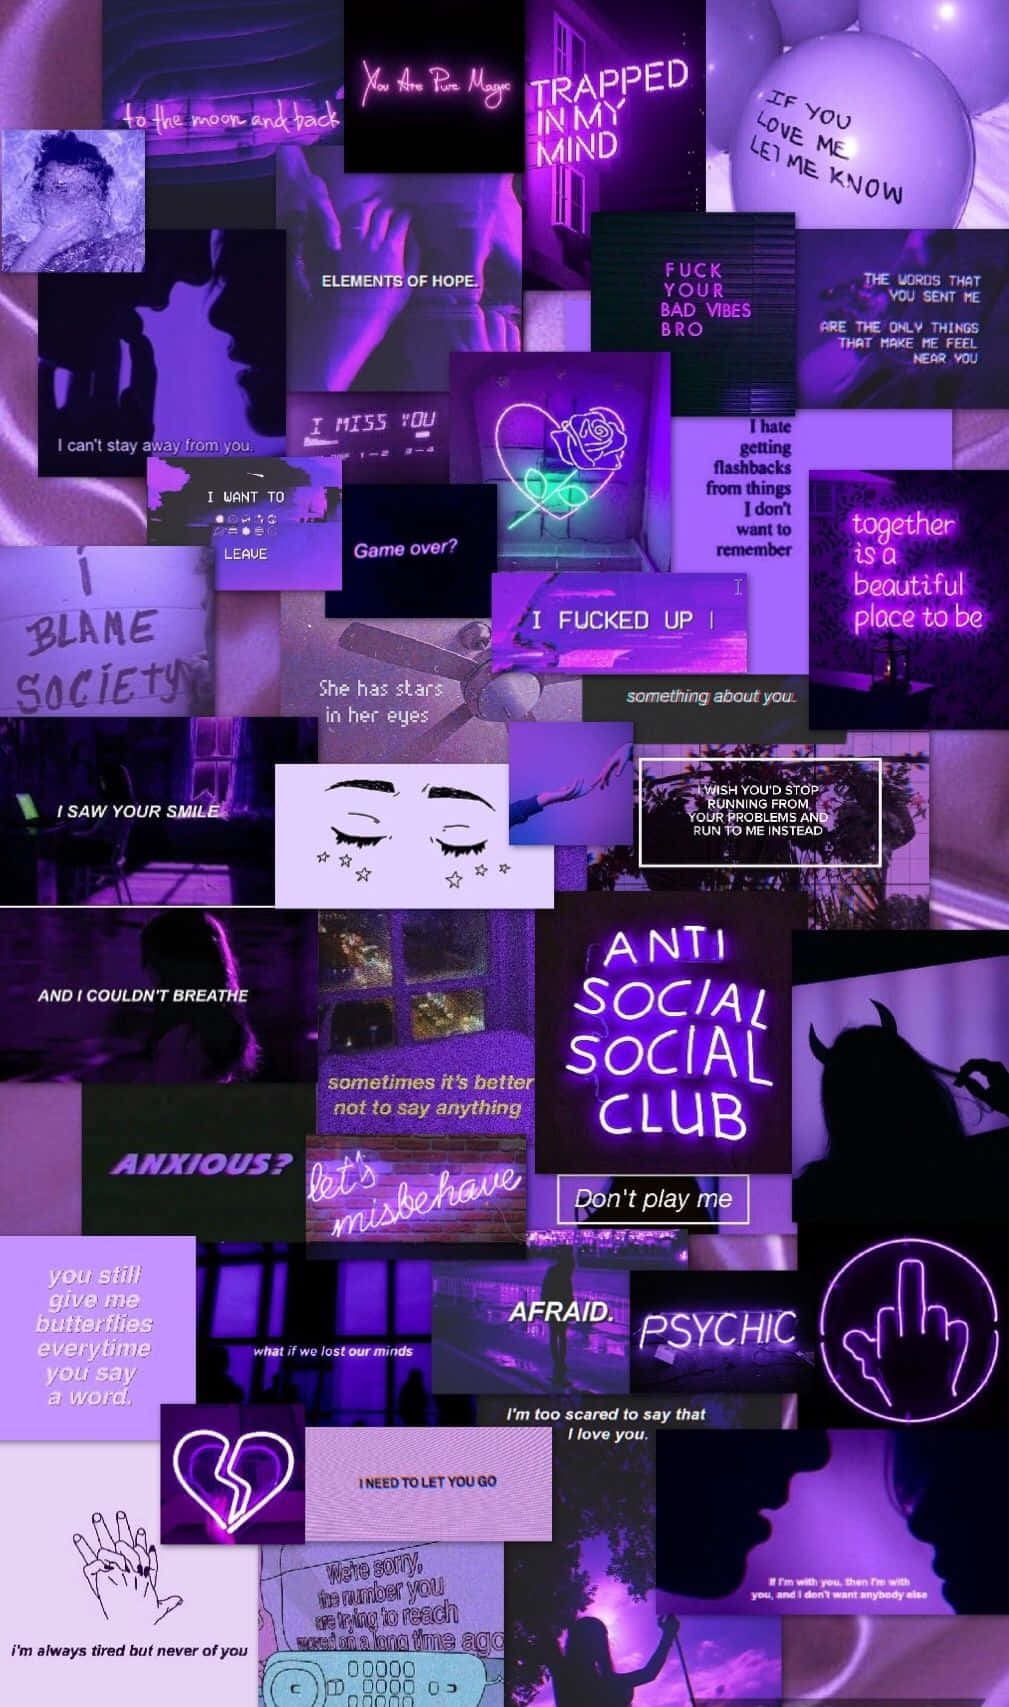 Aesthetic Purple Collage wallpaper for your phone or desktop - Anti Social Social Club